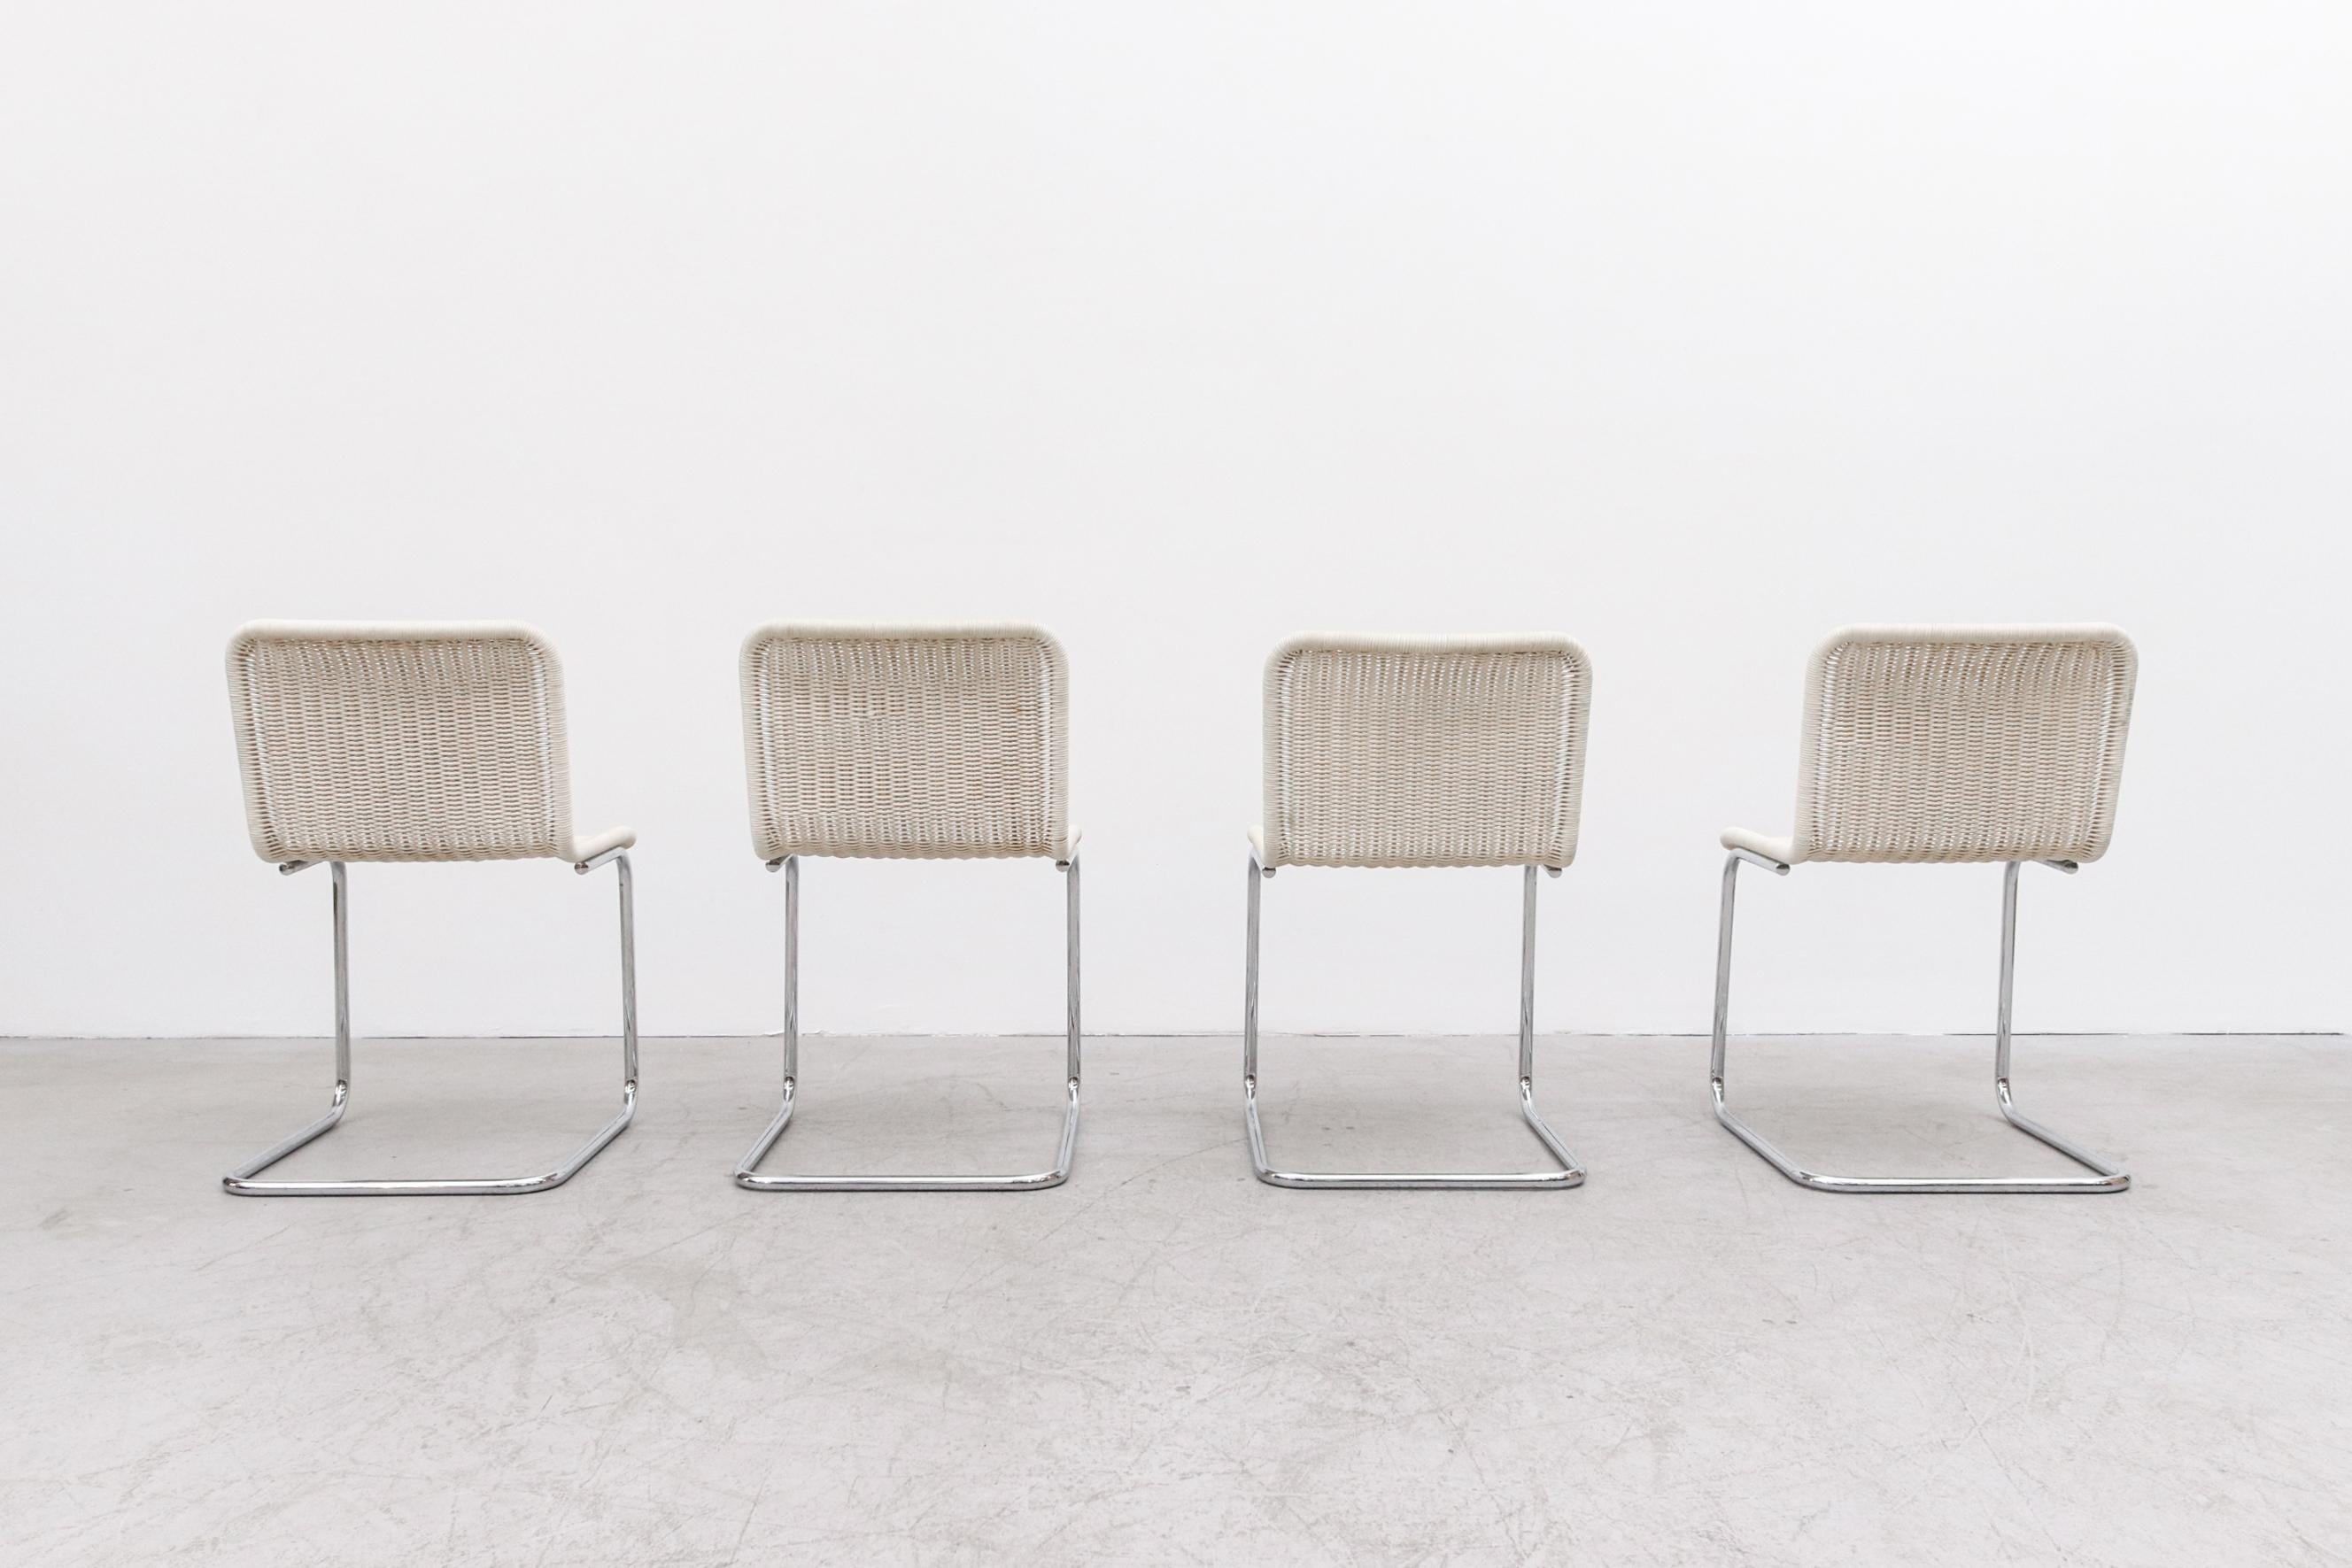 Late 20th Century Set of 4 Marcel Breuer Style Woven Rattan and Chrome Chairs